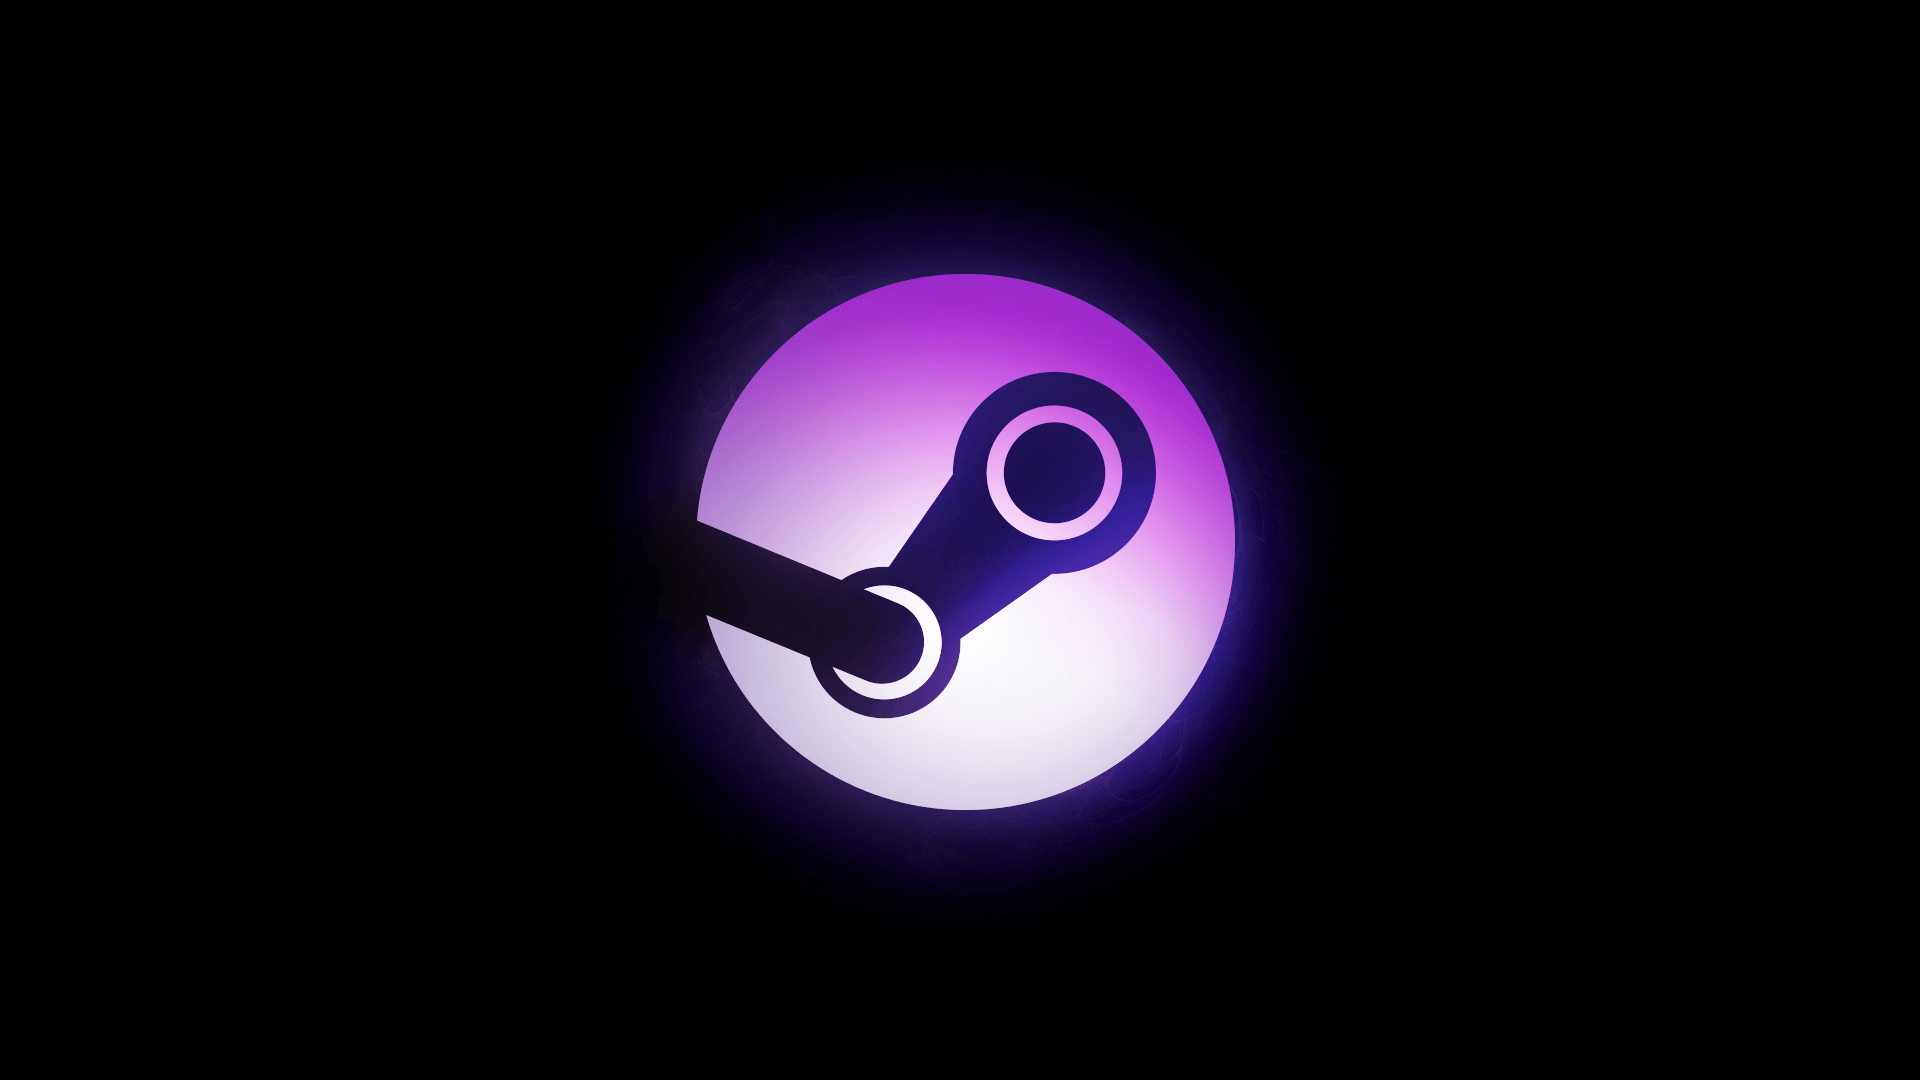 Steam Wallpapers